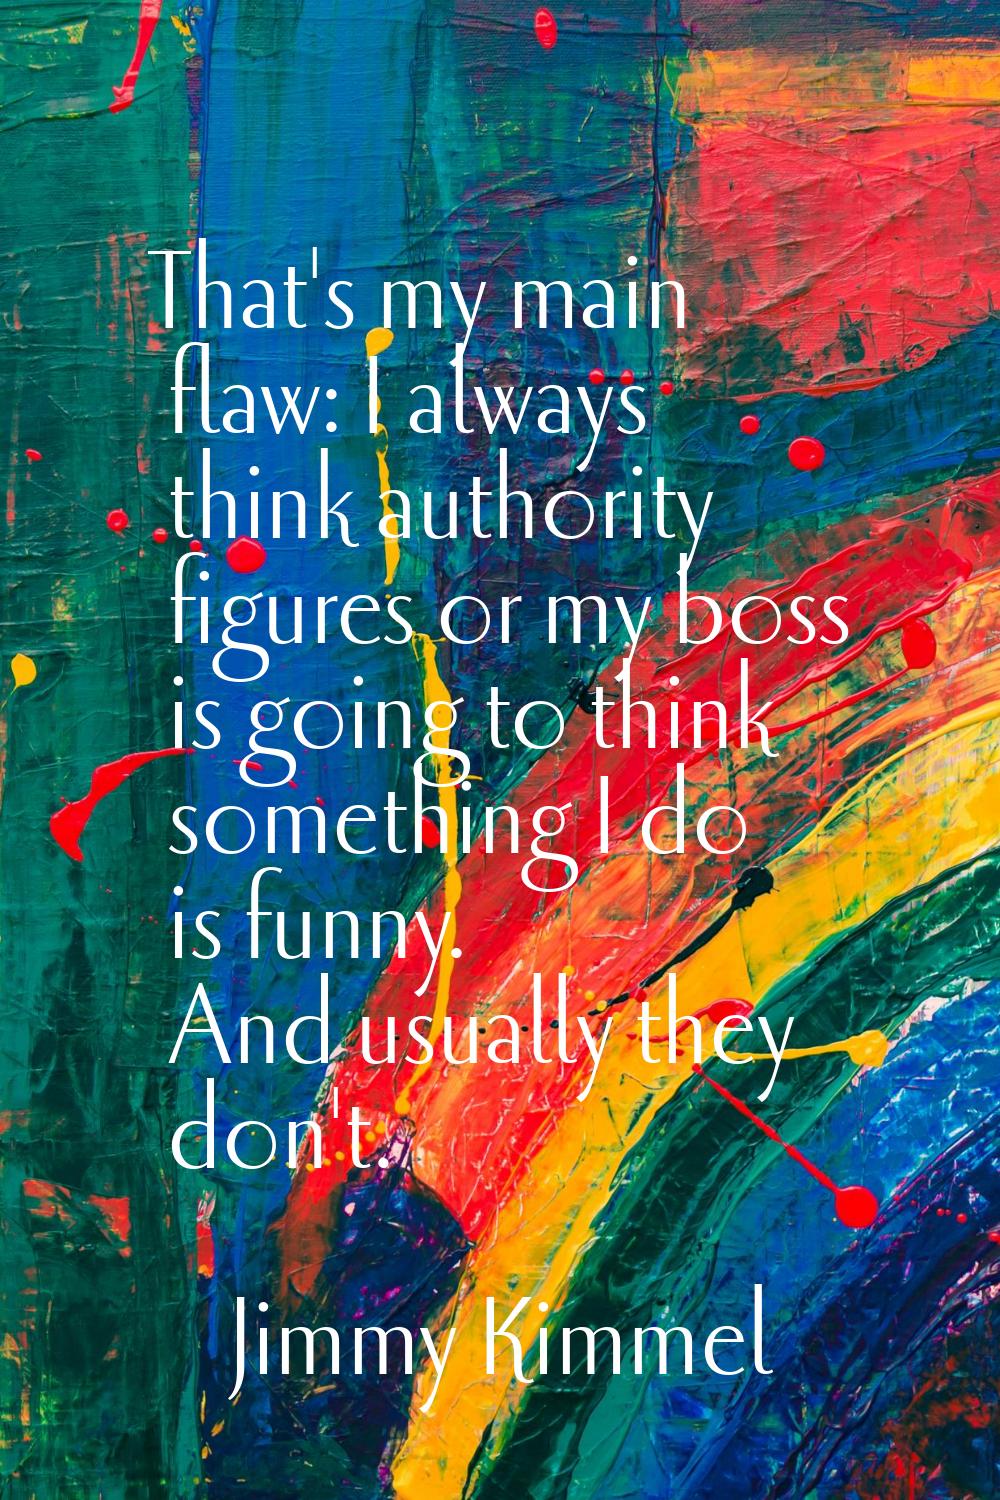 That's my main flaw: I always think authority figures or my boss is going to think something I do i